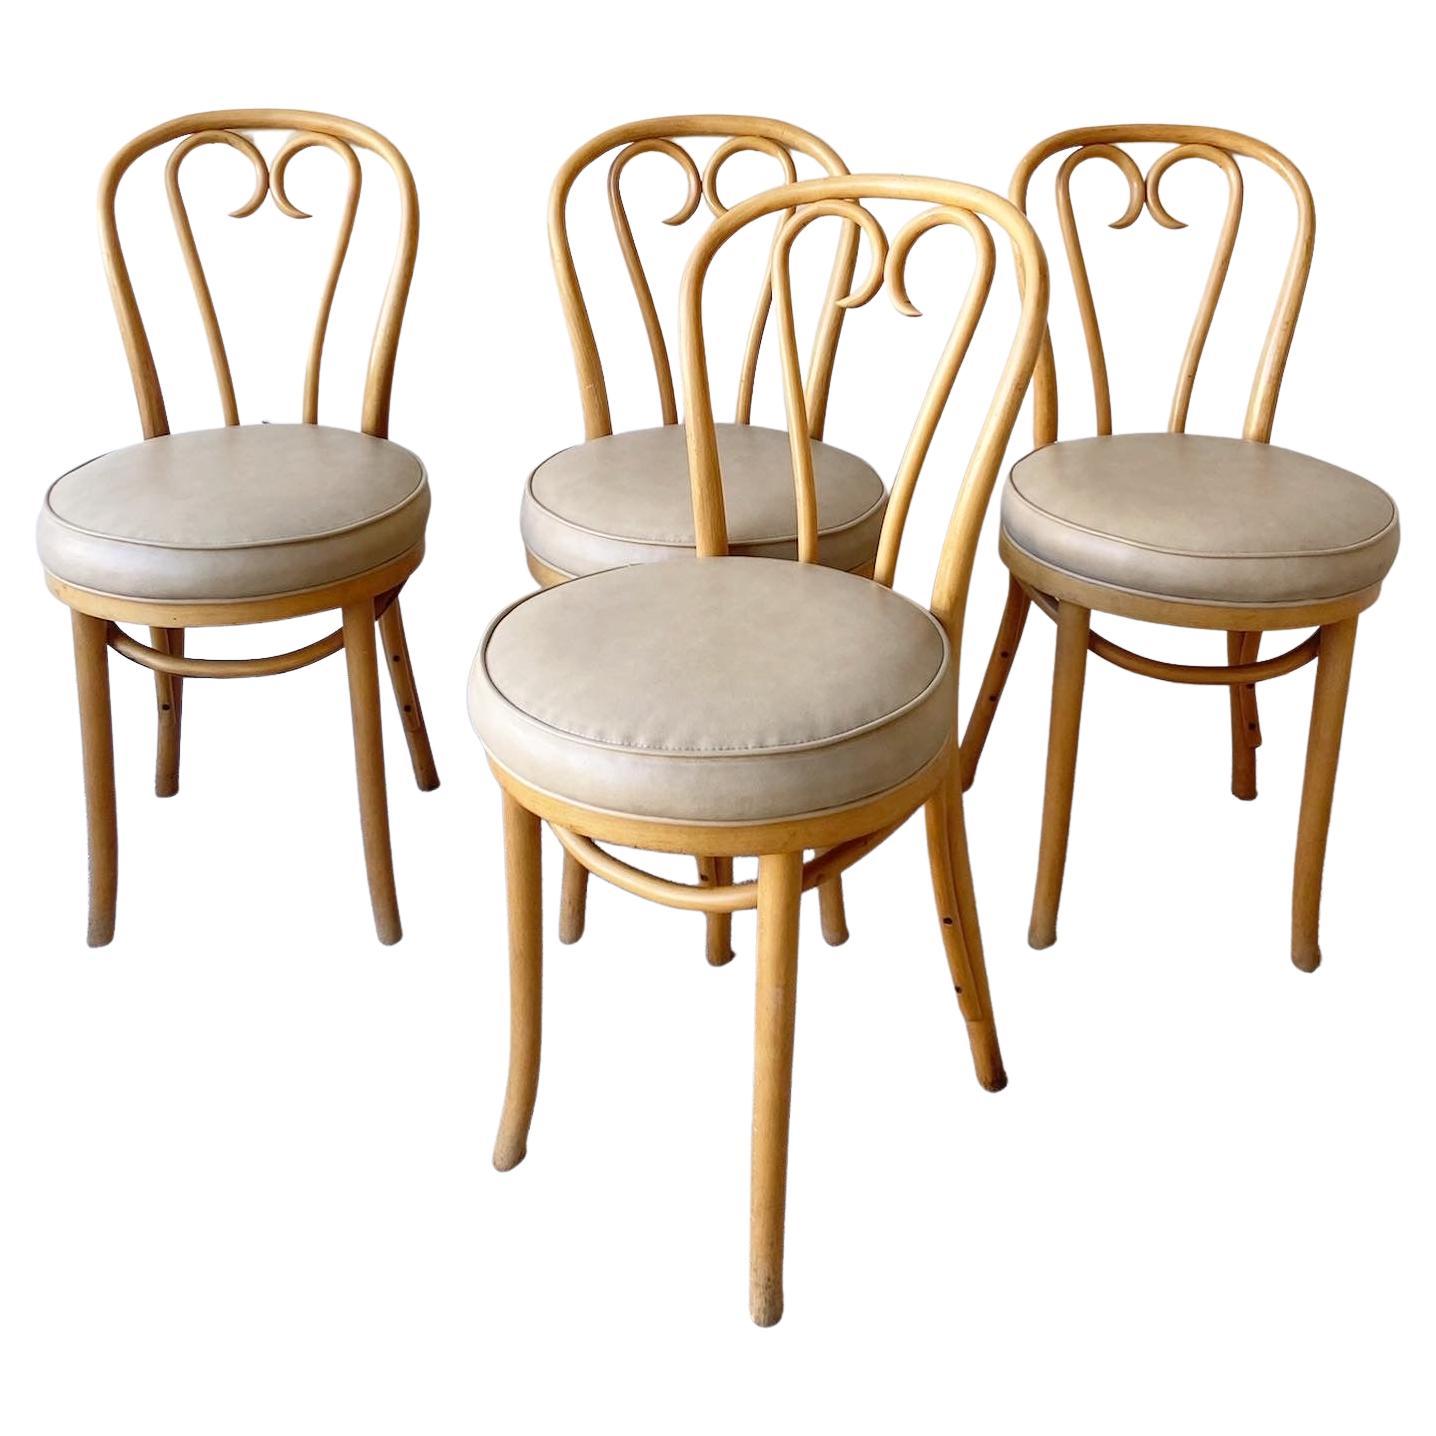 Vintage Boho Chic Bentwood Cafe Bistro Dining Chairs, Set of 4 For Sale